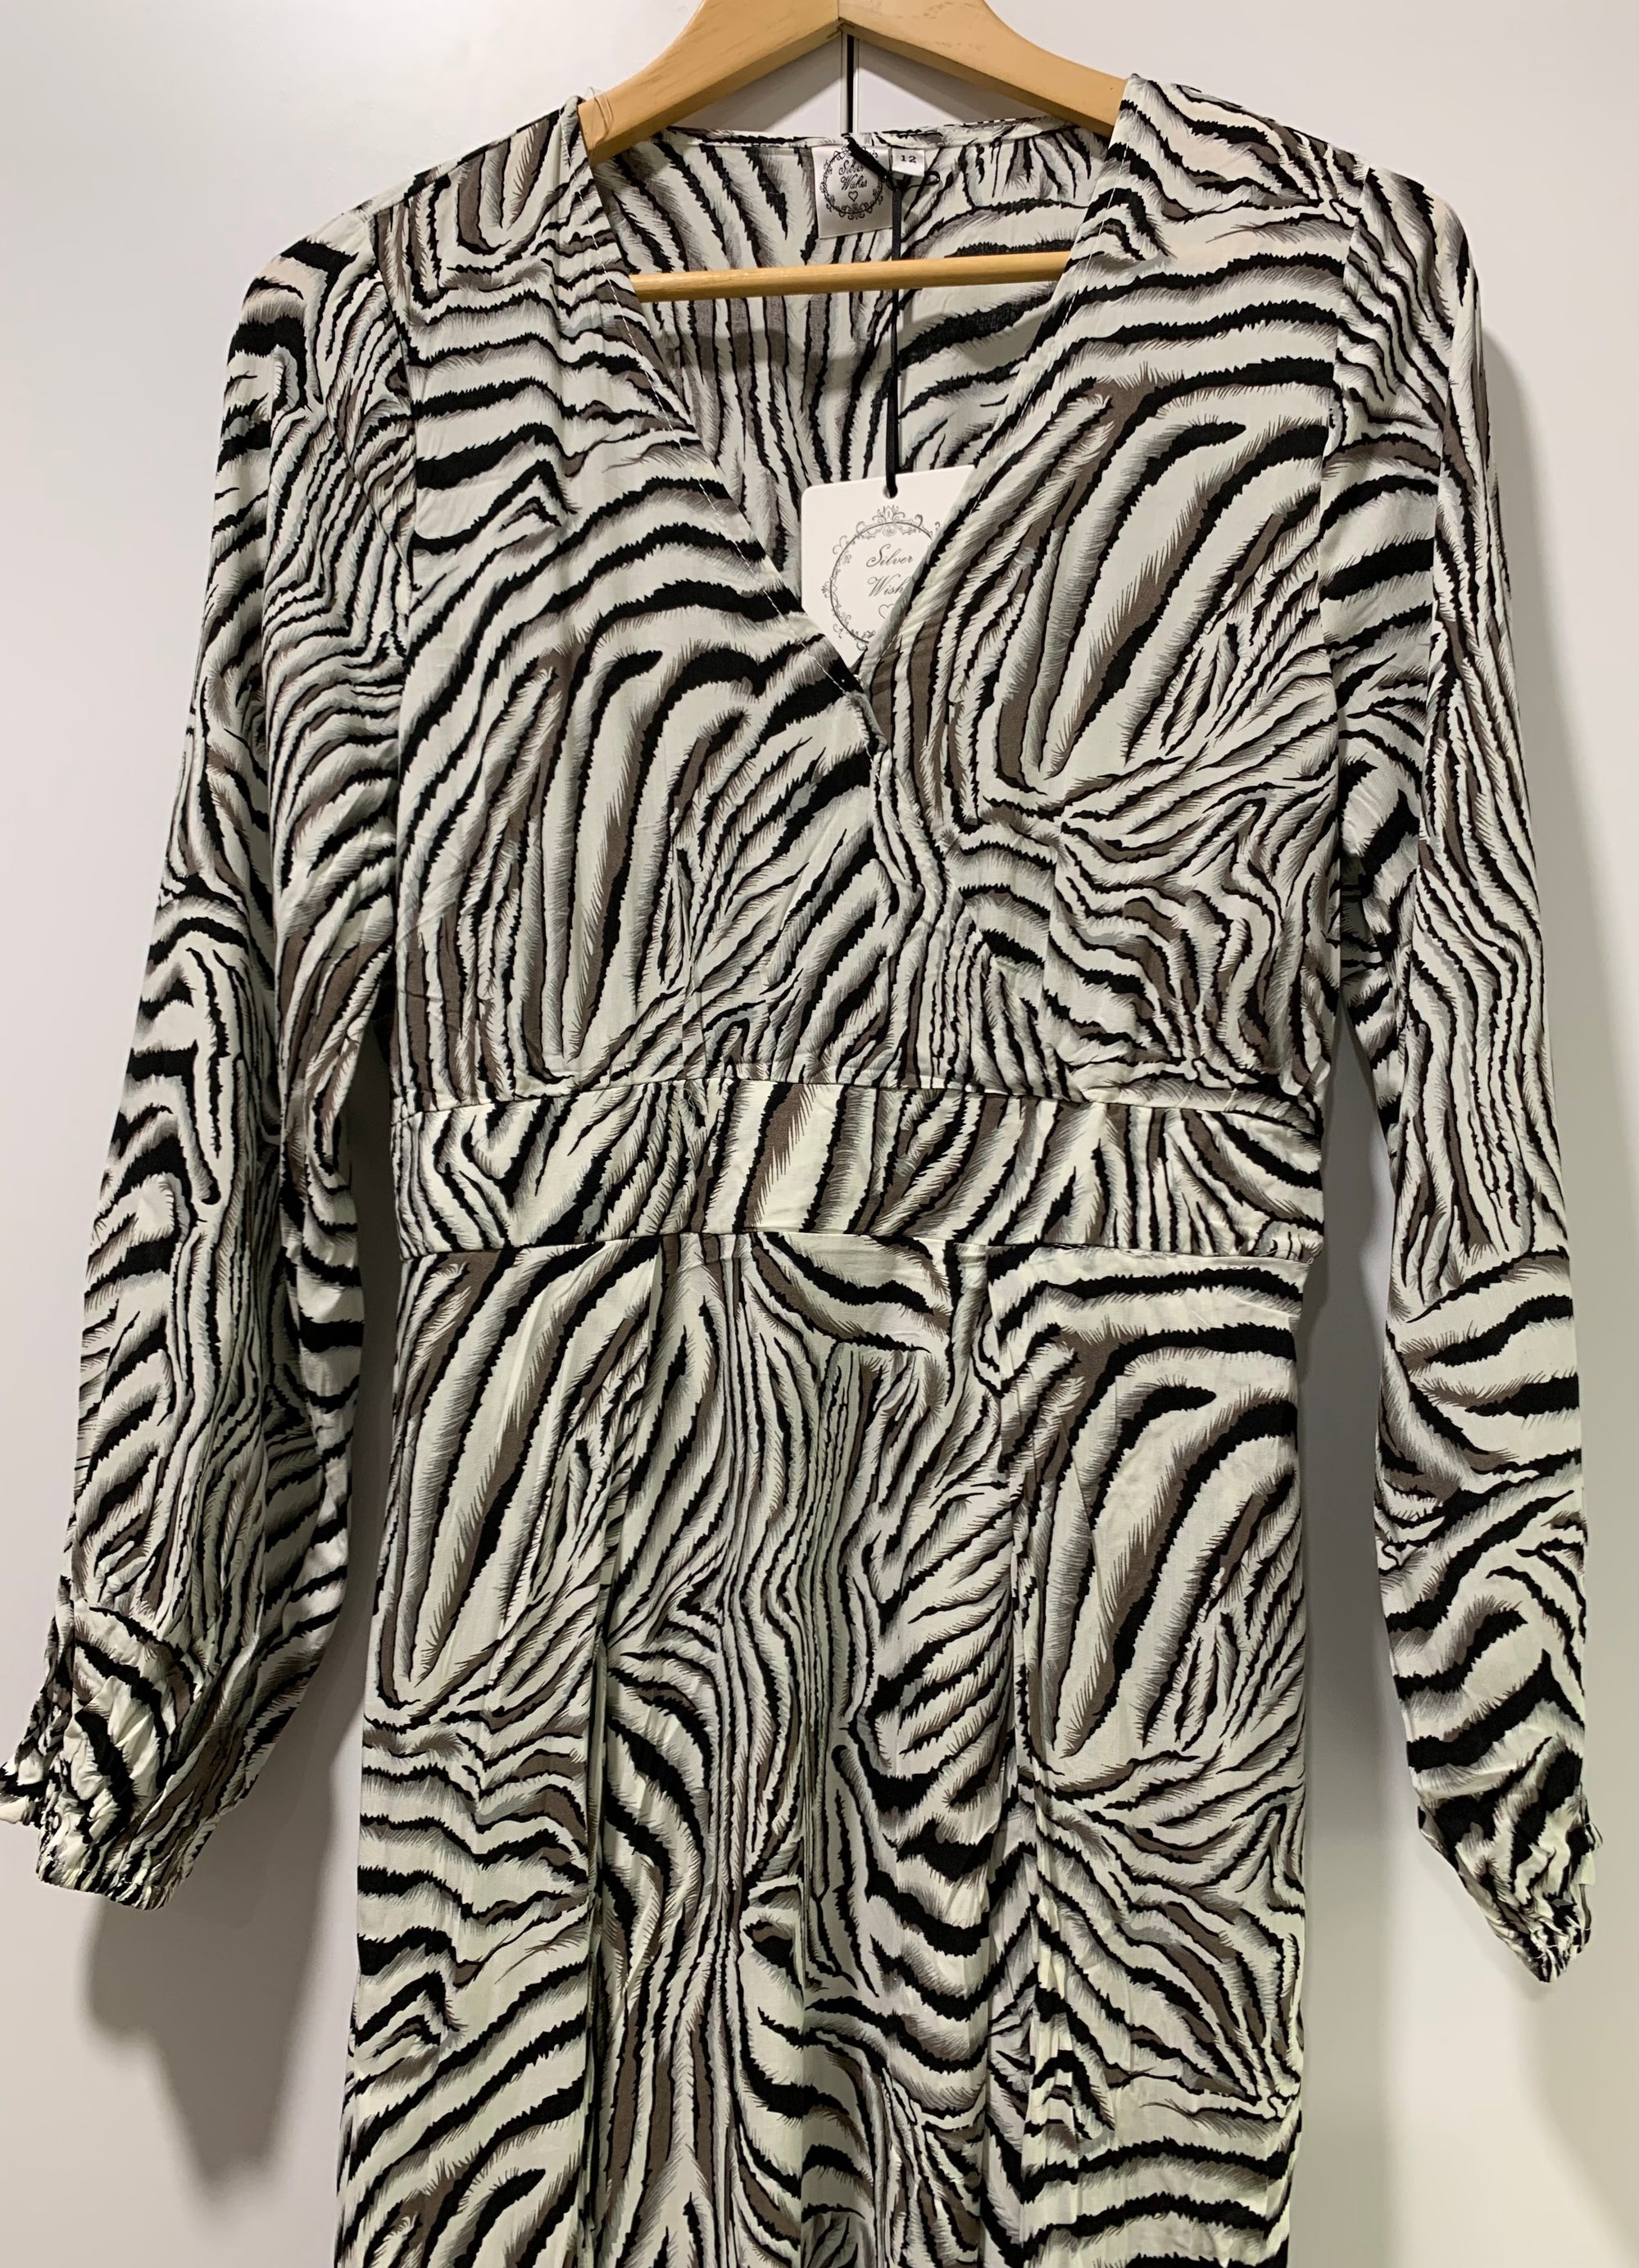 Silver Wishes Crossover Maxi Dress with Slit in Black & White Zebra Print